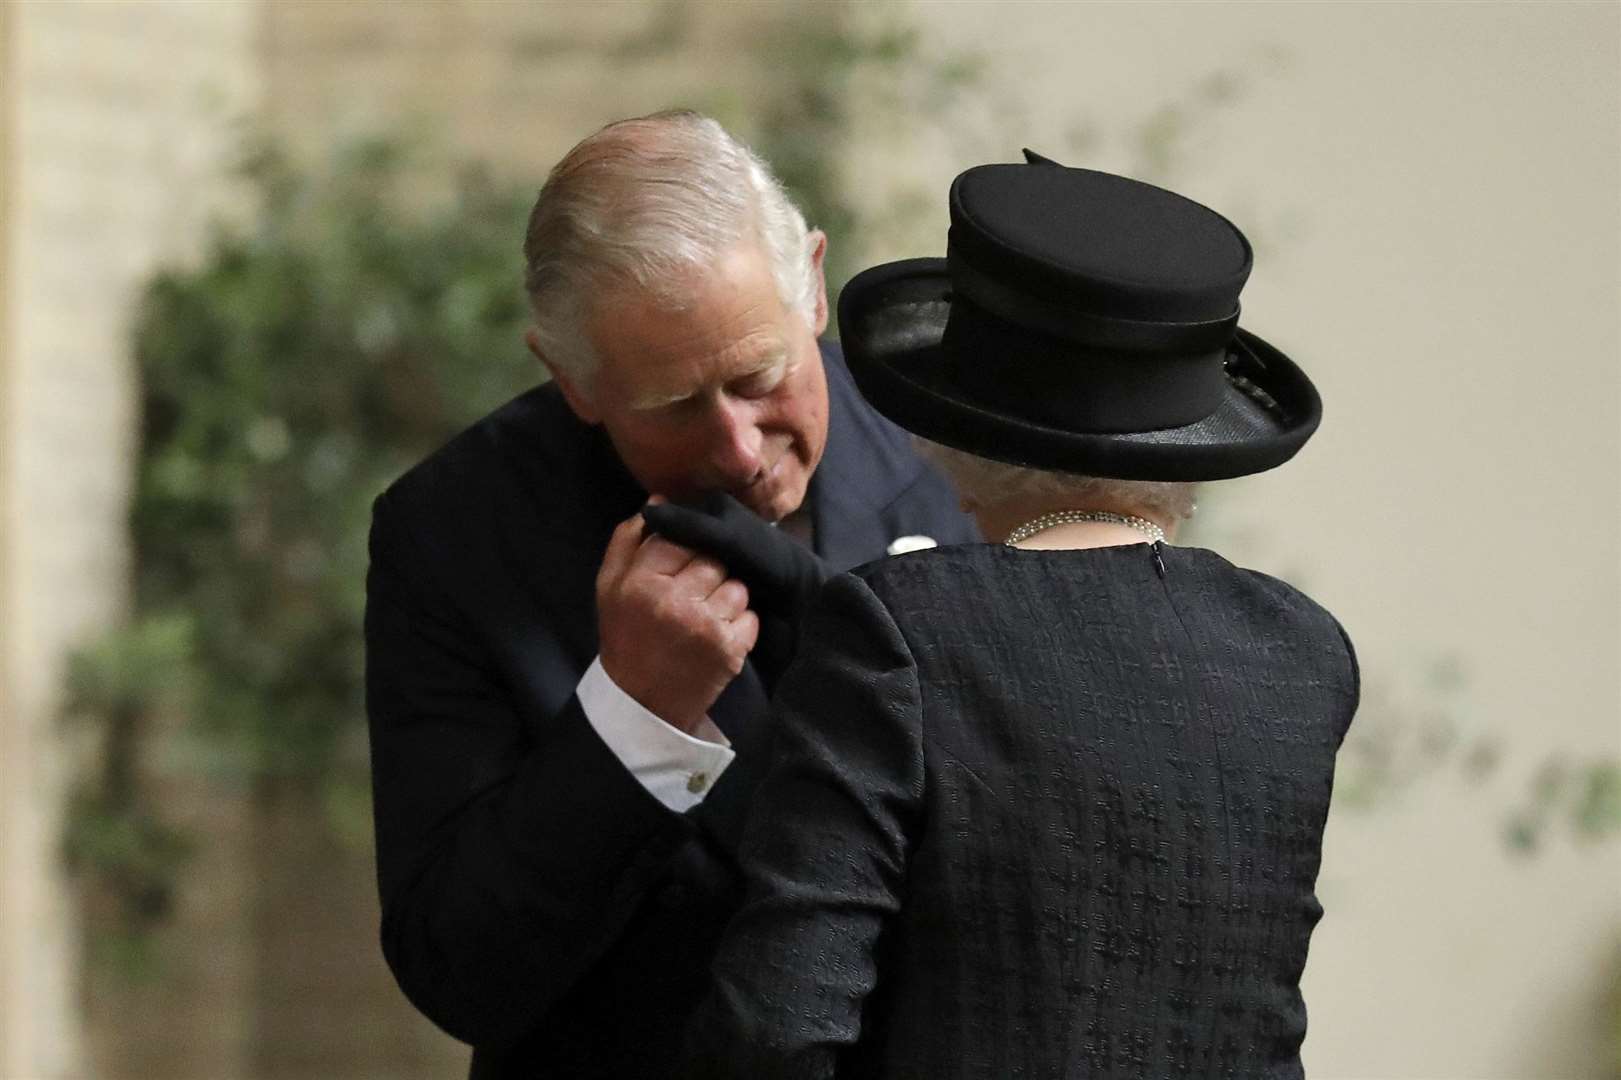 The Prince of Wales greets the Queen at the funeral of Countess Mountbatten of Burma in 2017 (Matt Dunham/PA)